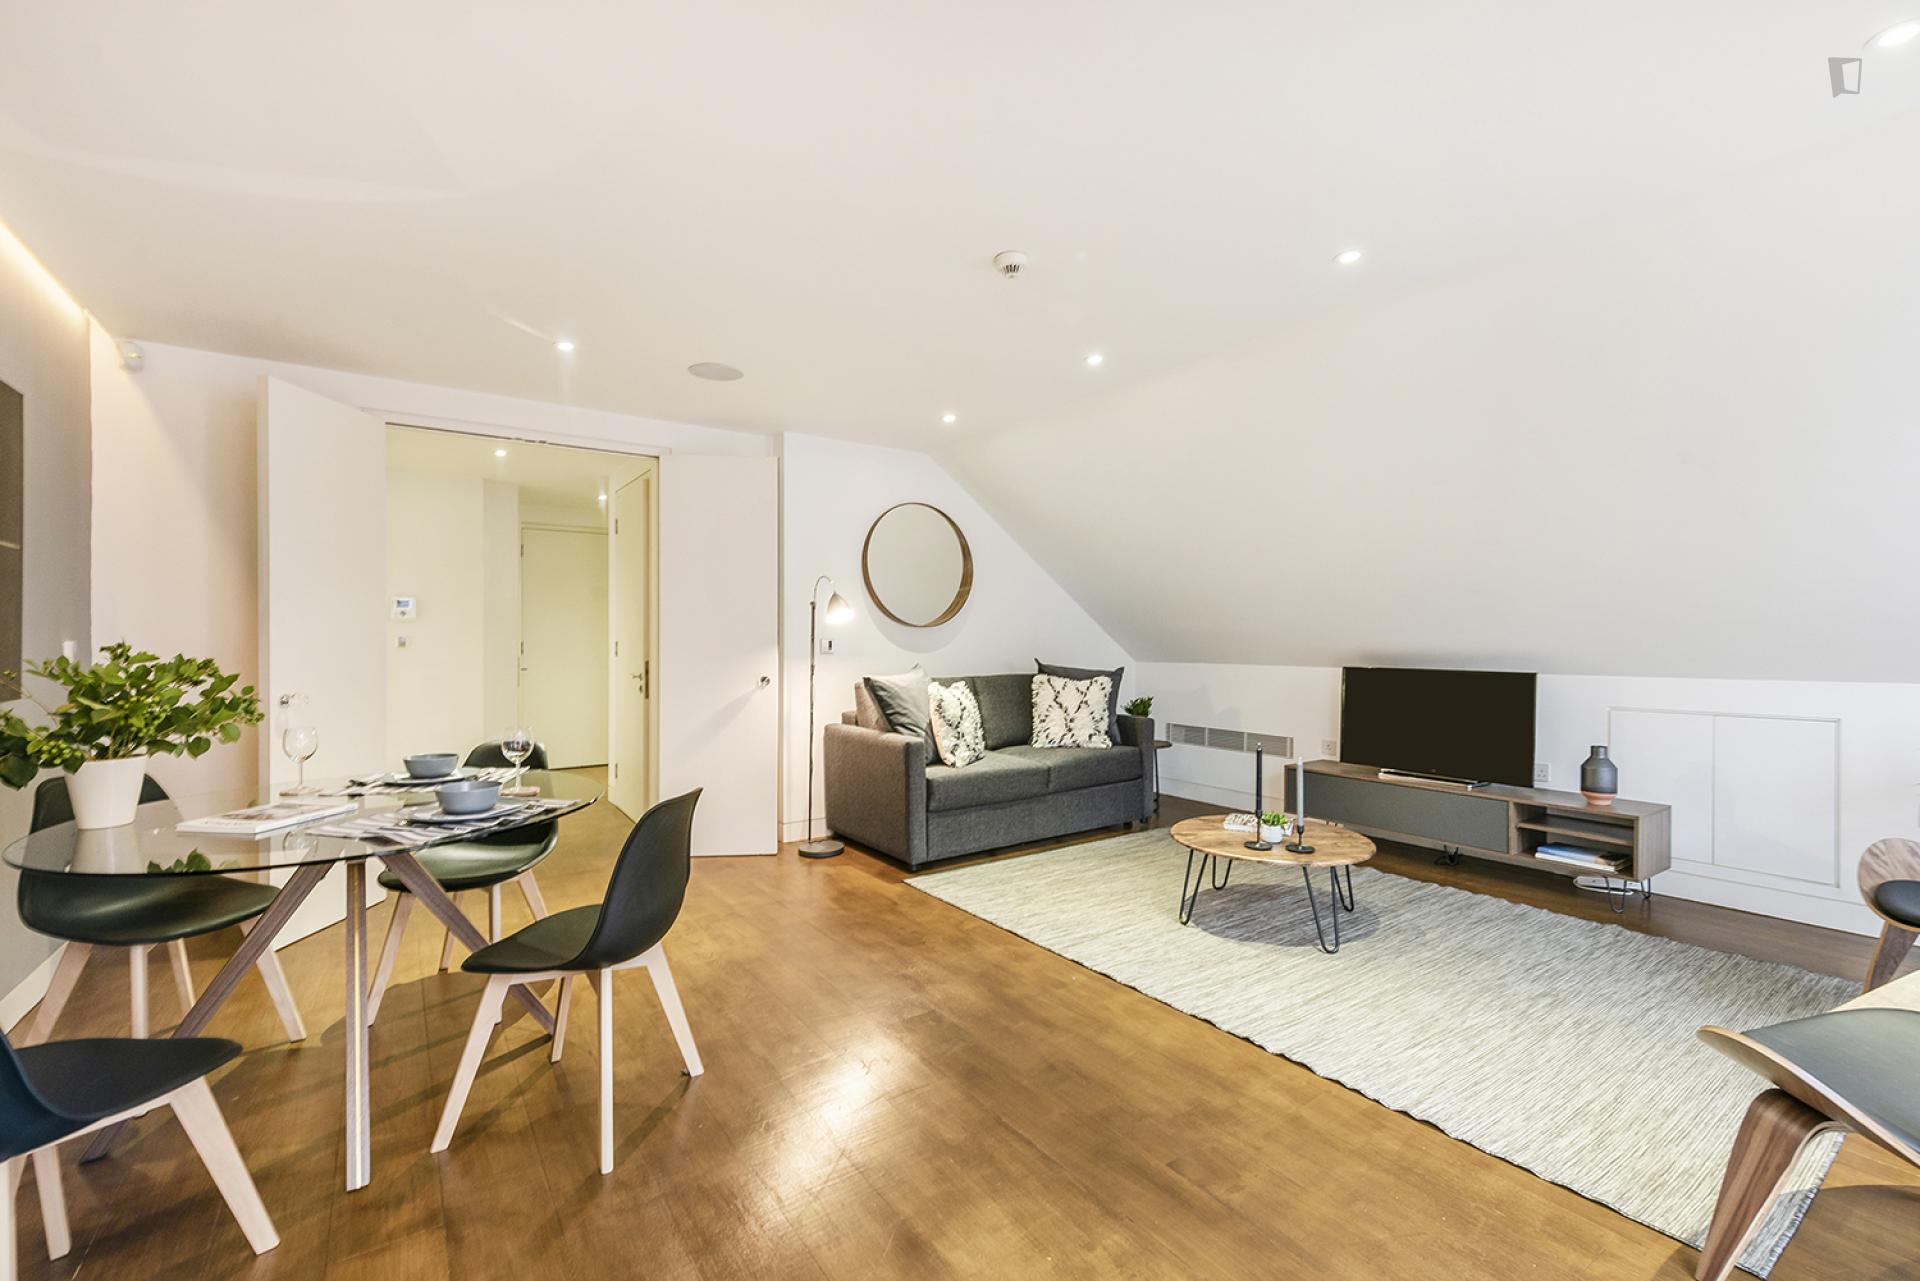 Bedford - Amazing apartment in London city centre